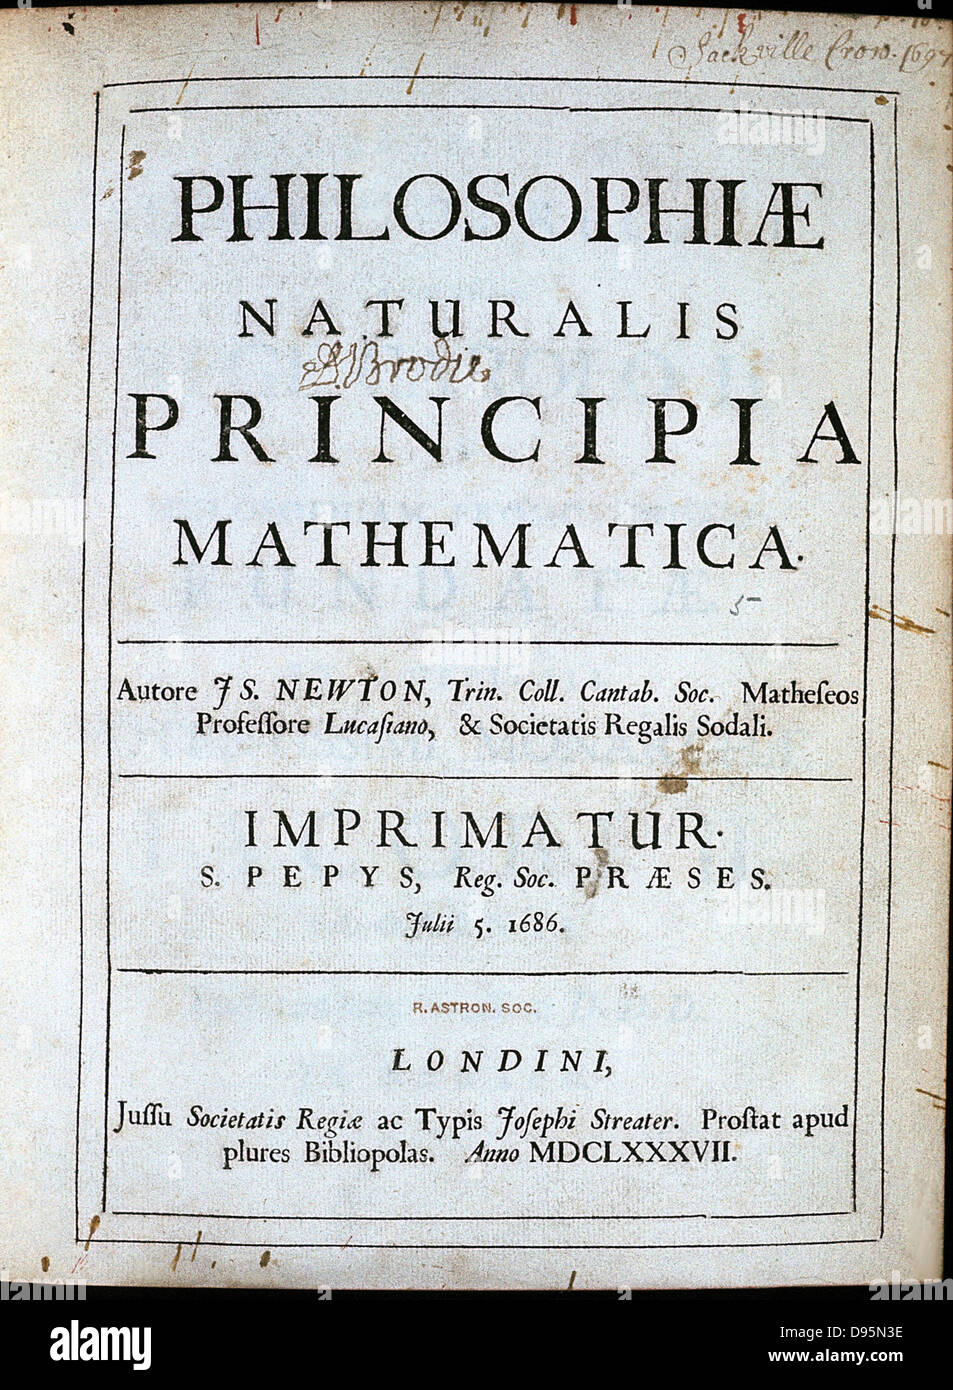 isaac newton 1642 1727 english scientist and mathematician title page D95N3E